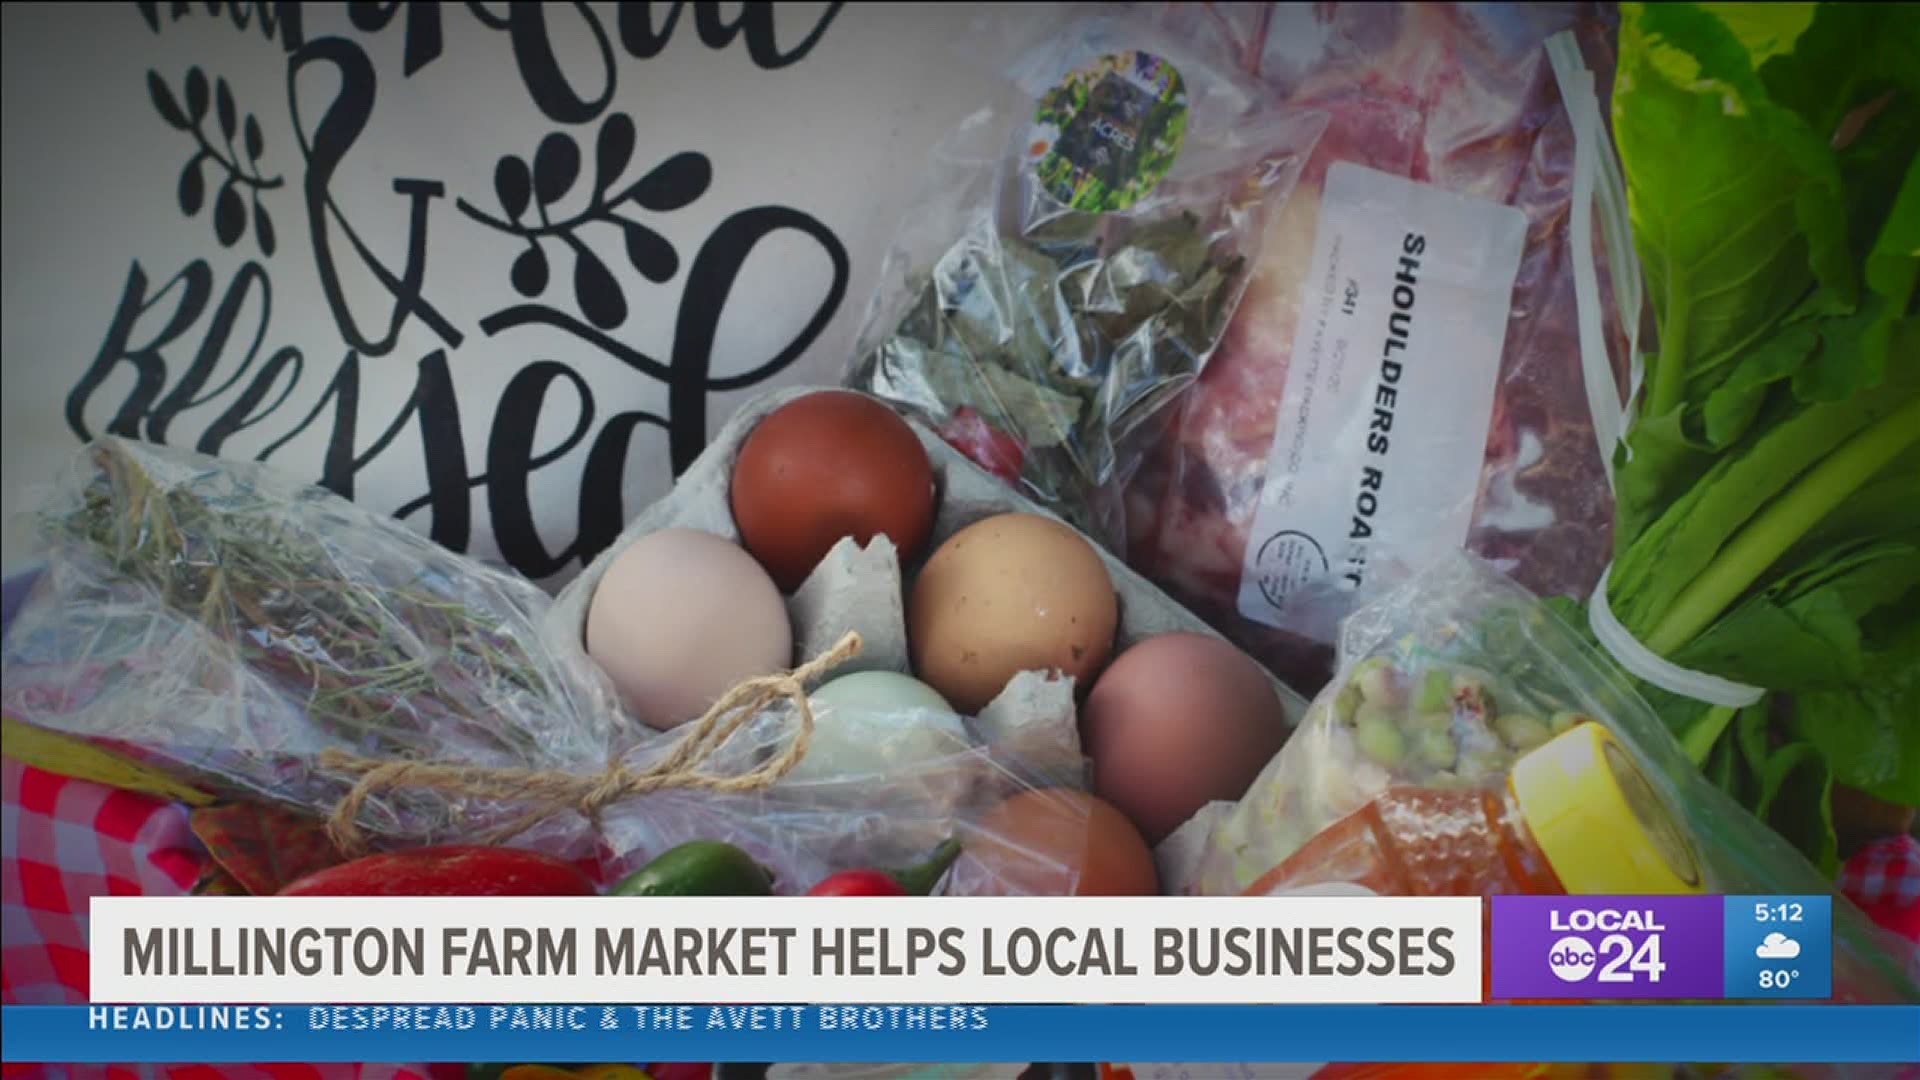 Once a month, people are flocking to Lightfoot Farm for a farm market that was started to support local vendors during the pandemic.